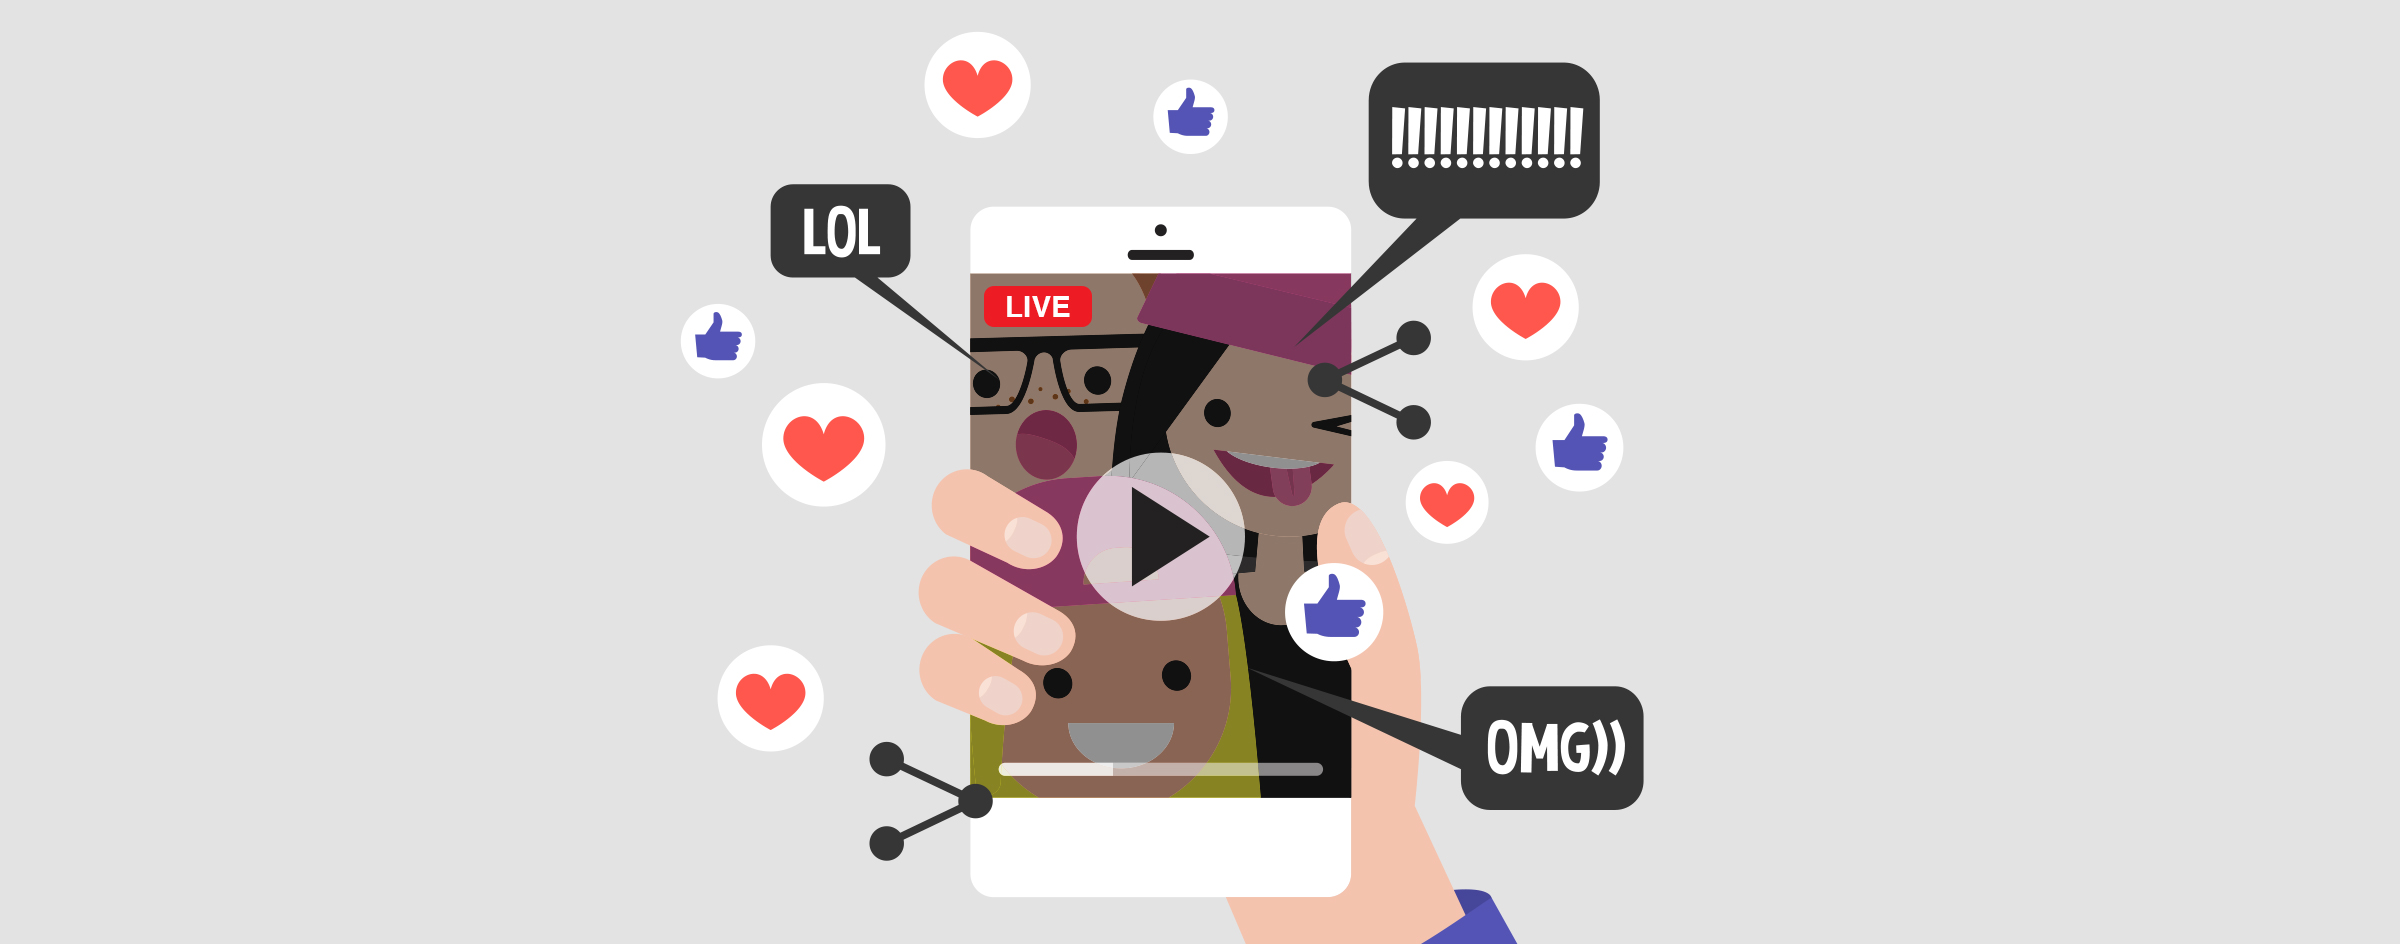 Video marketing: Why you should add live streaming to your content strategy